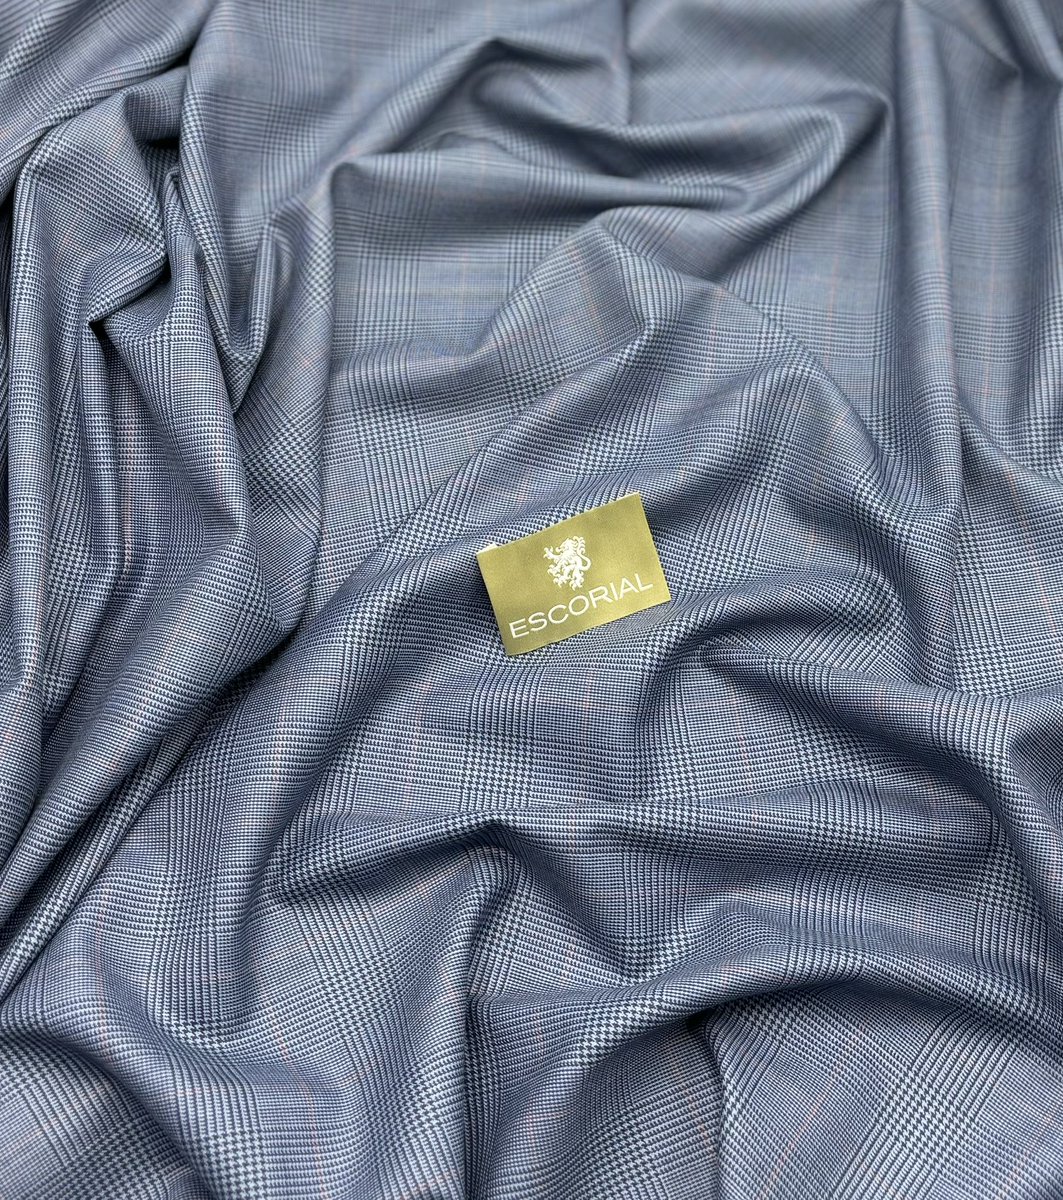 Blue Prince of Wales check 100% Escorial fabric. Luxurious, soft and beautifully made. Online now at kabbanitextiles.com #madeinengland #escorial #wool #check #luxury #suiting #tailoring #fabric #textiles #sustainable